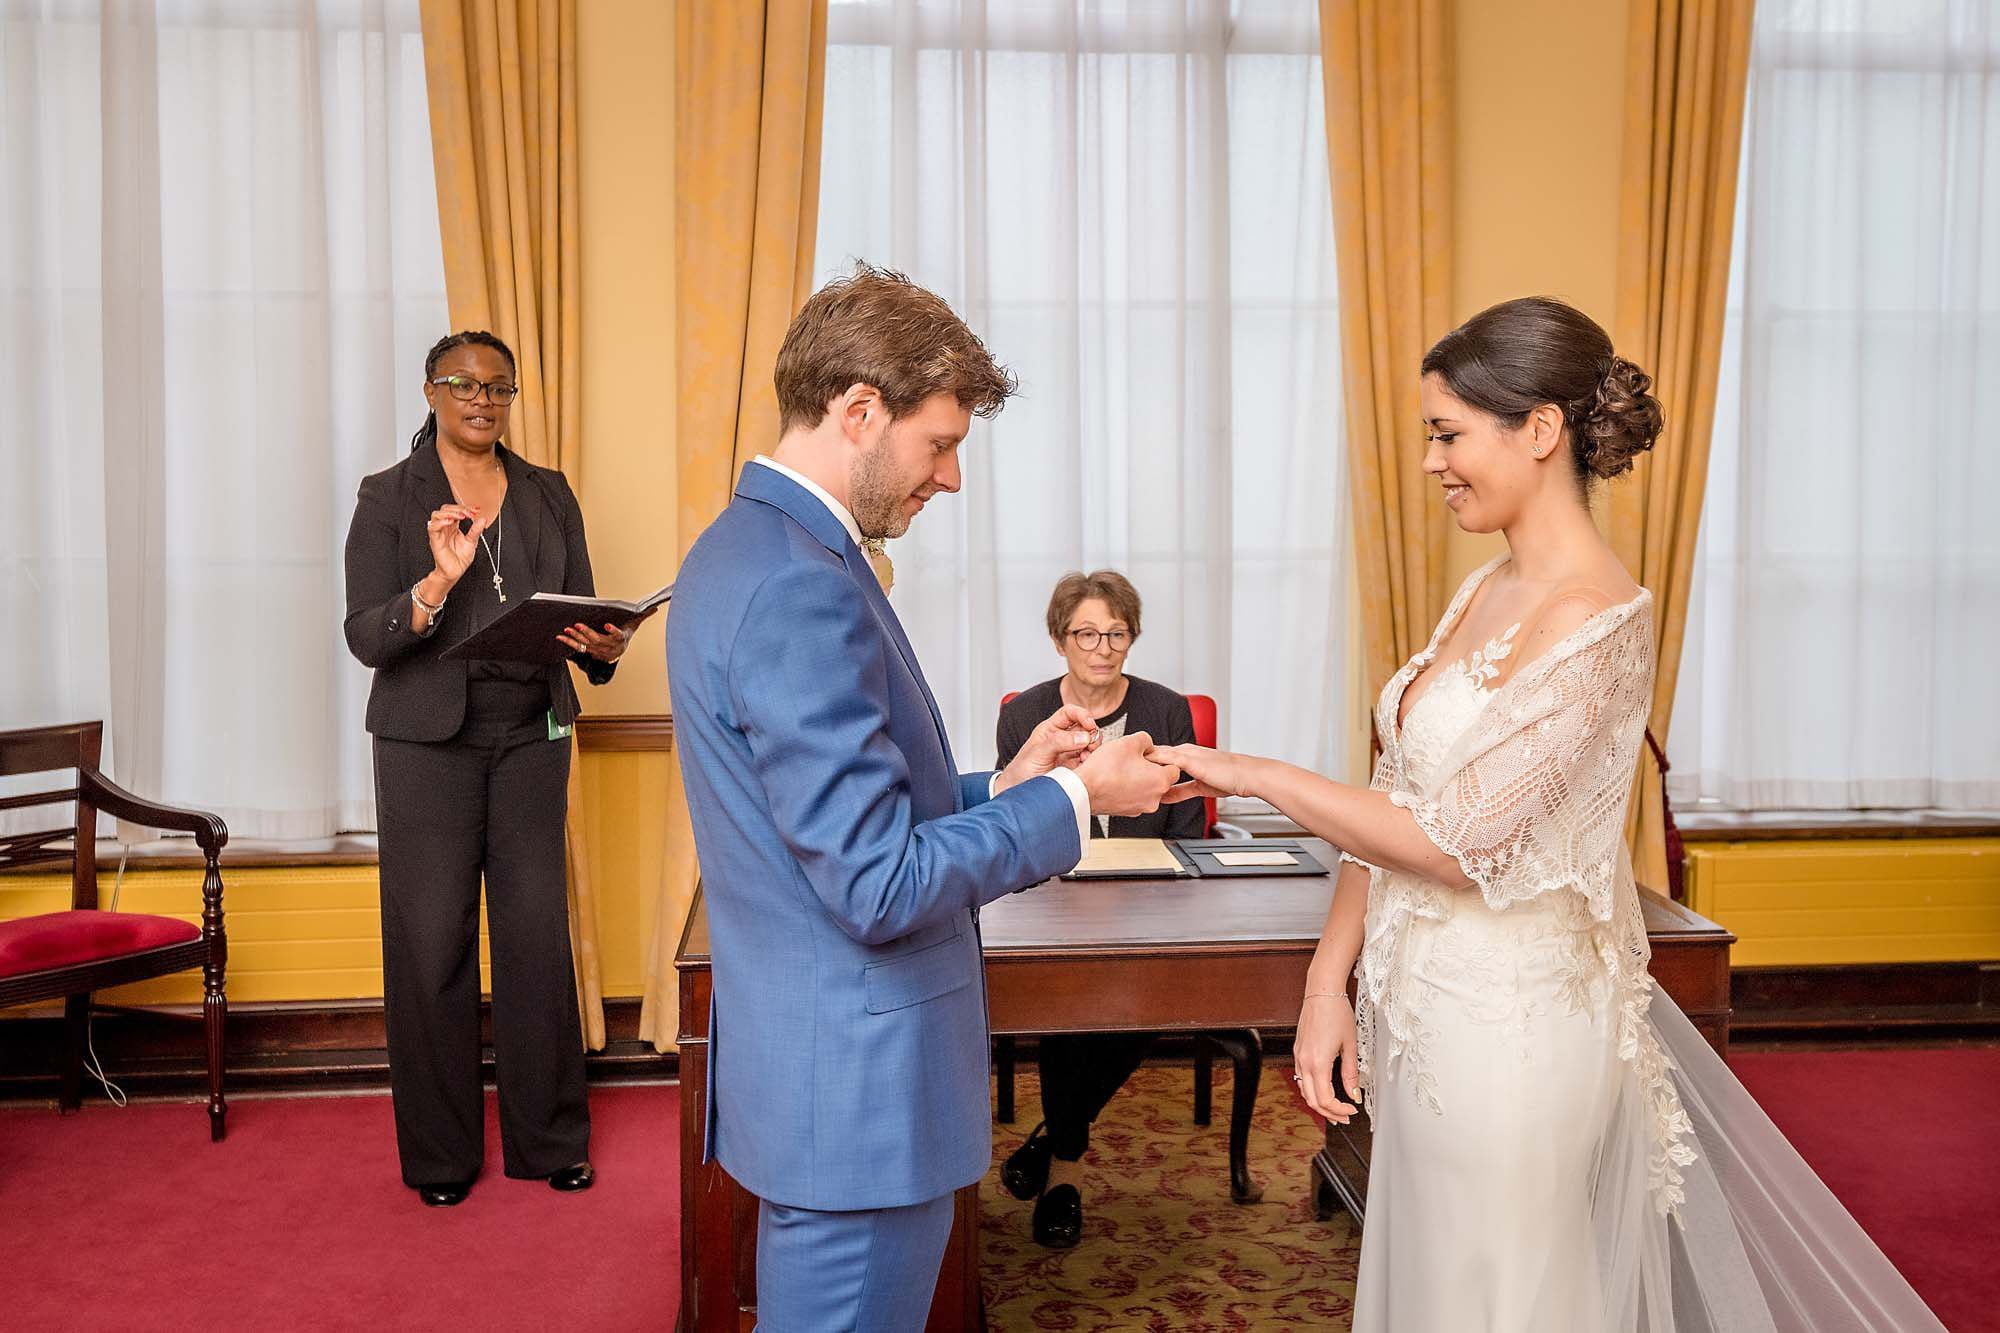 In Room 99 at Islington Town Hall, the groom proudly places the ring on his bride's finger as she smiles